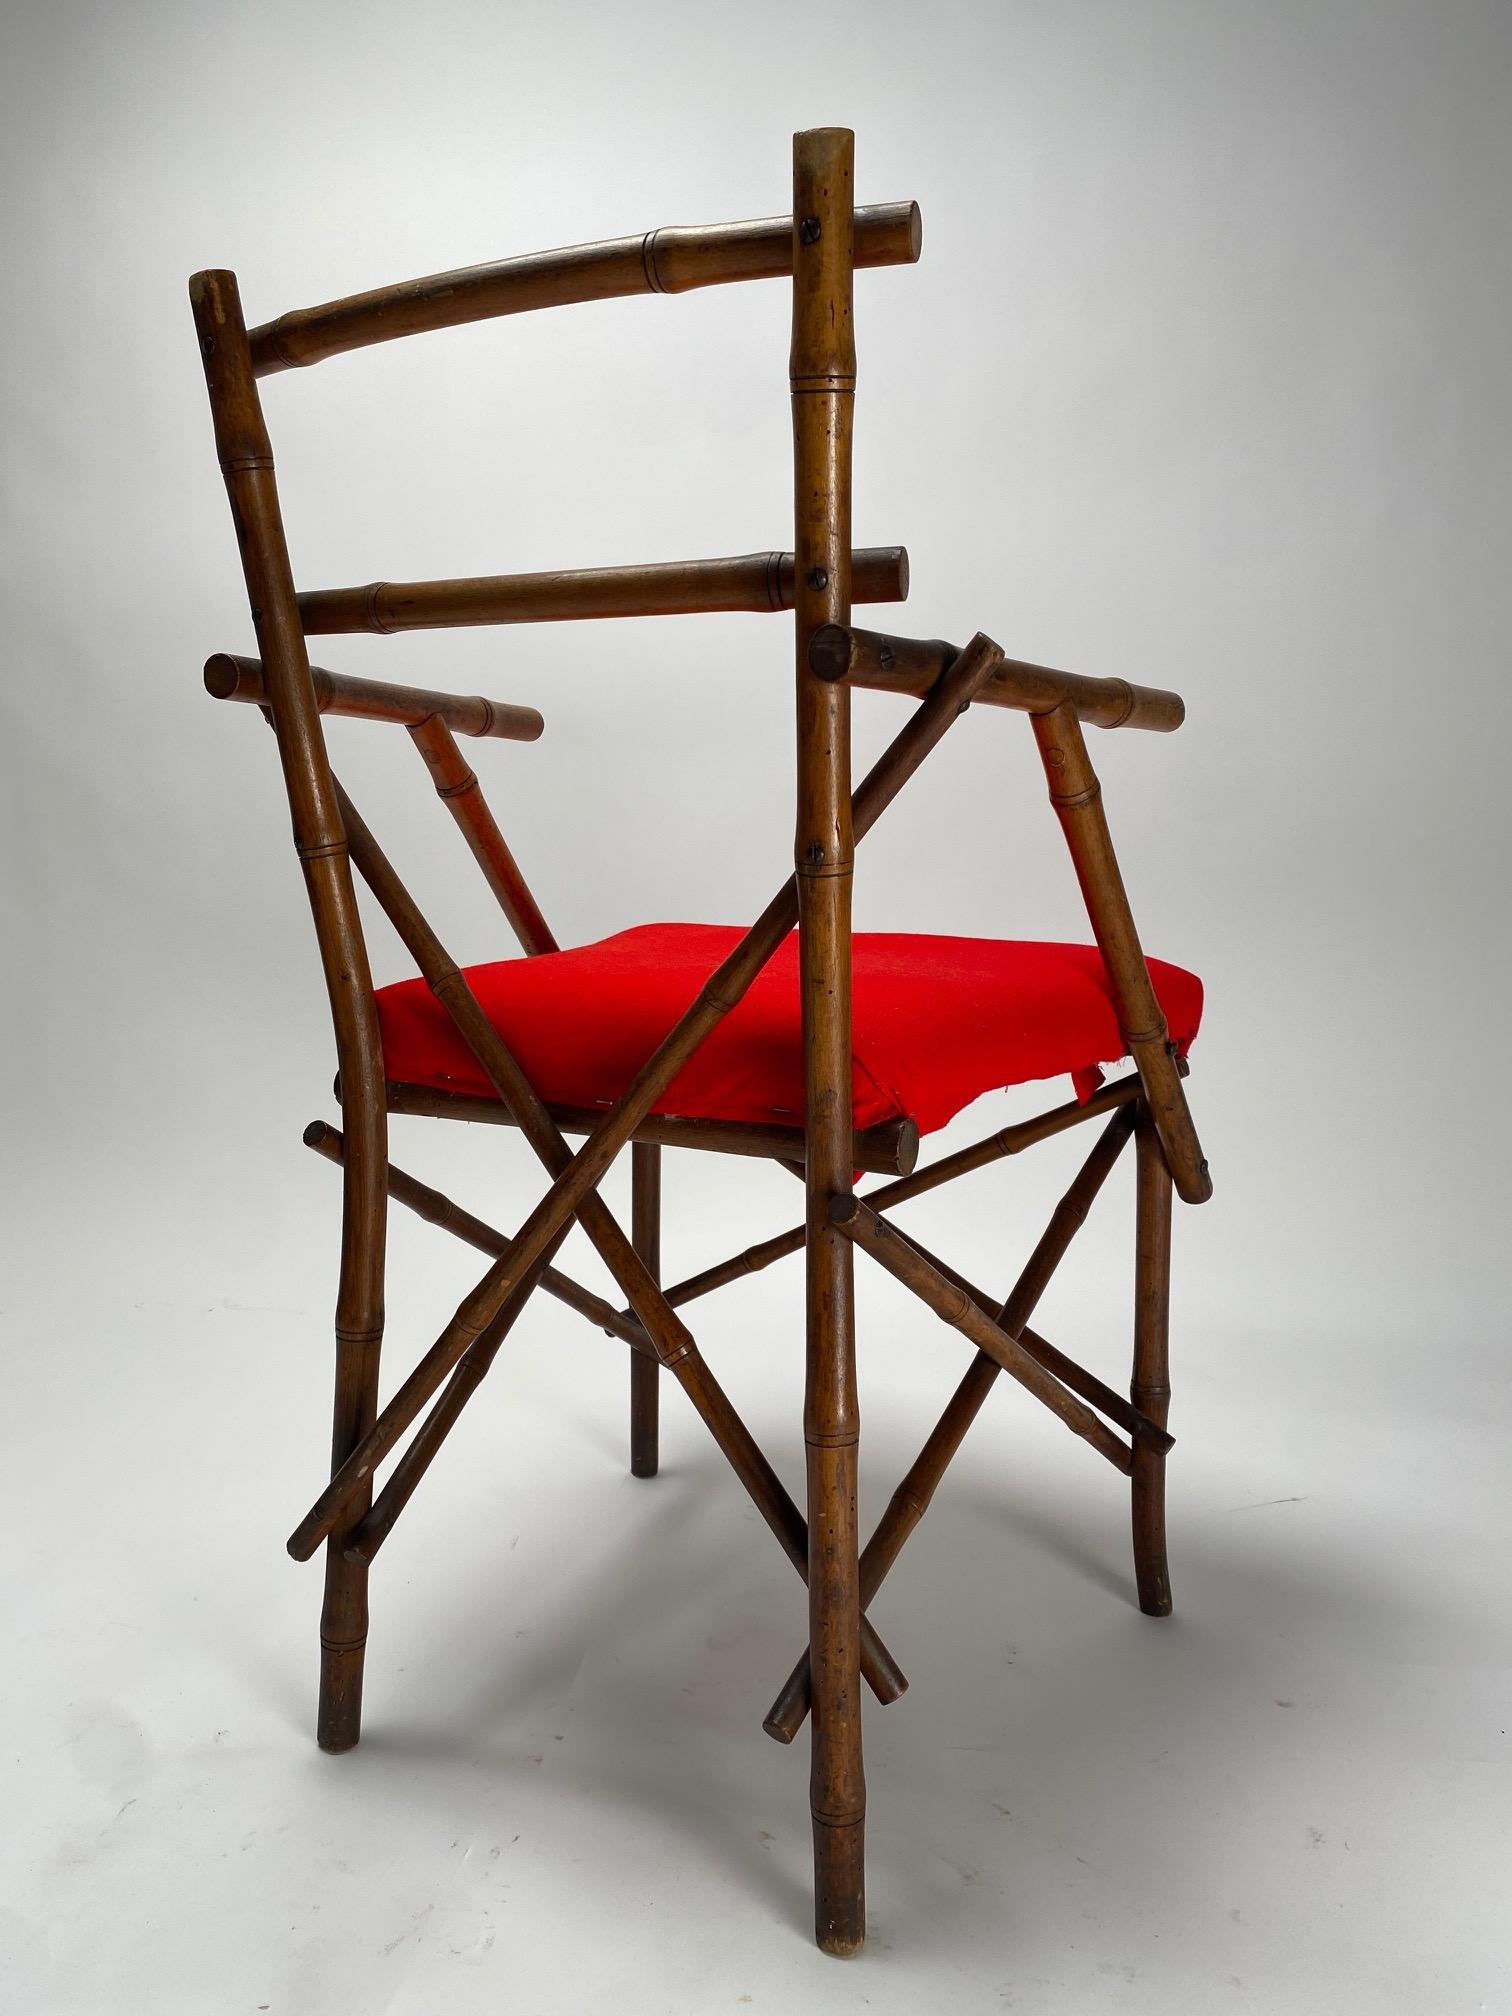 Sculptural Bamboo Chair, Italy 1900s In Good Condition For Sale In Argelato, BO